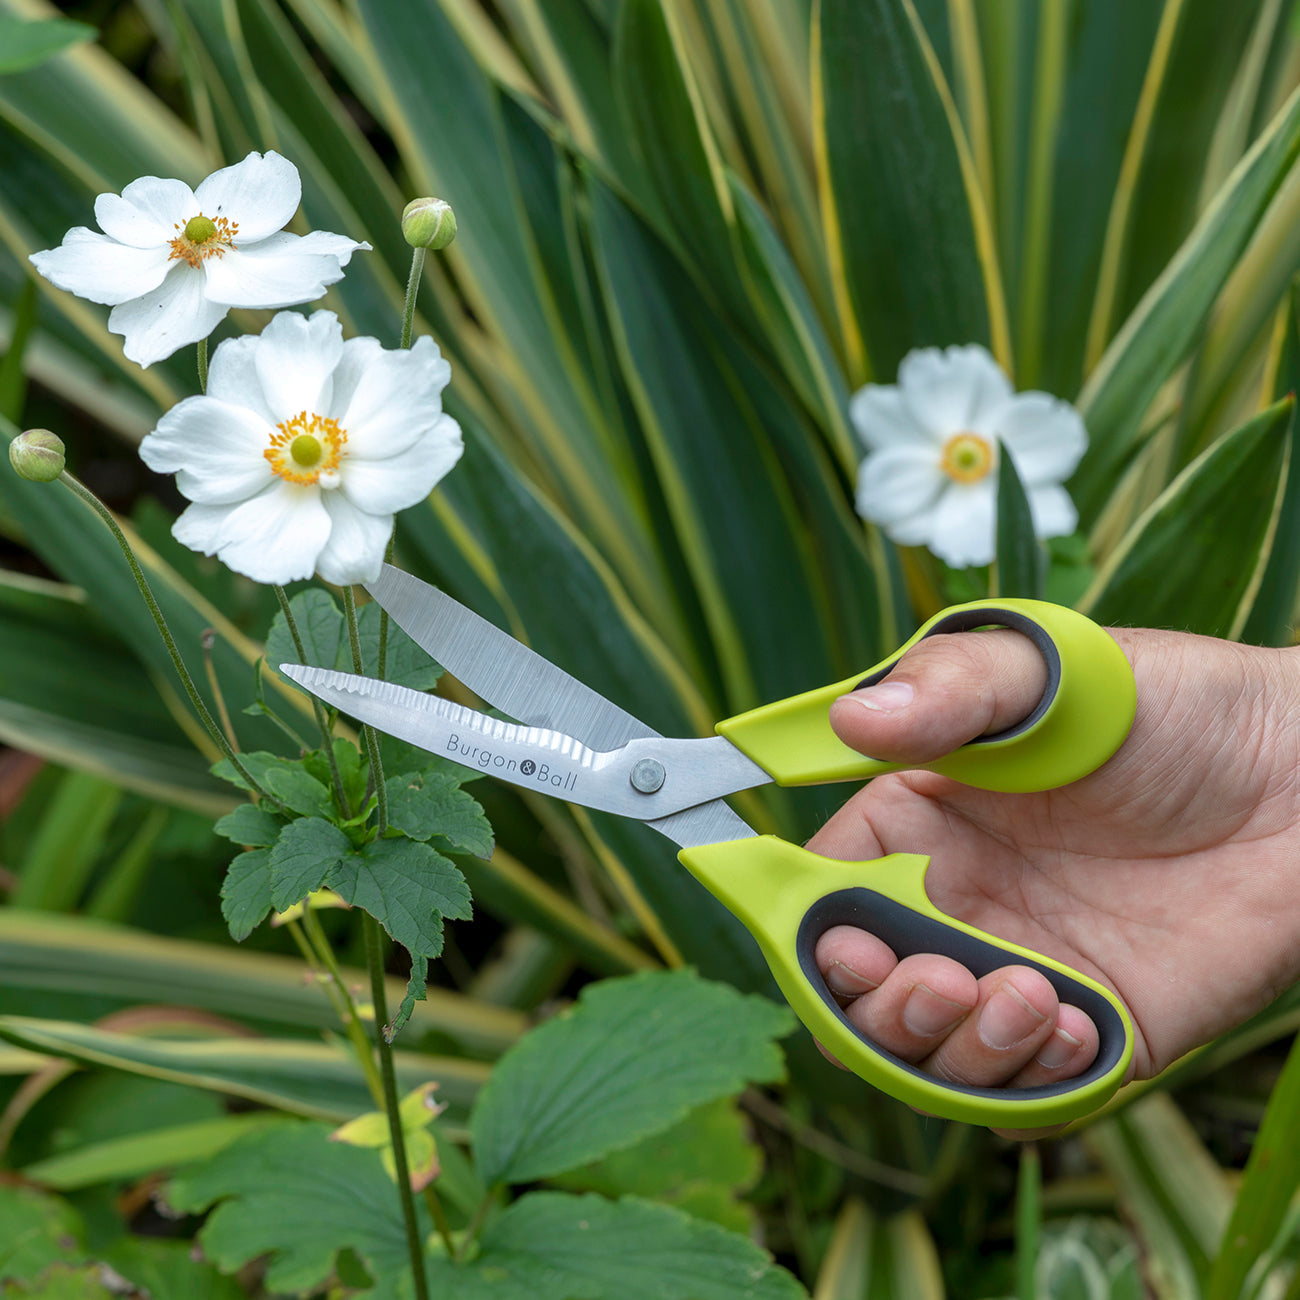 The scissors have been designed for easy, clean cutting of plants and flowers.